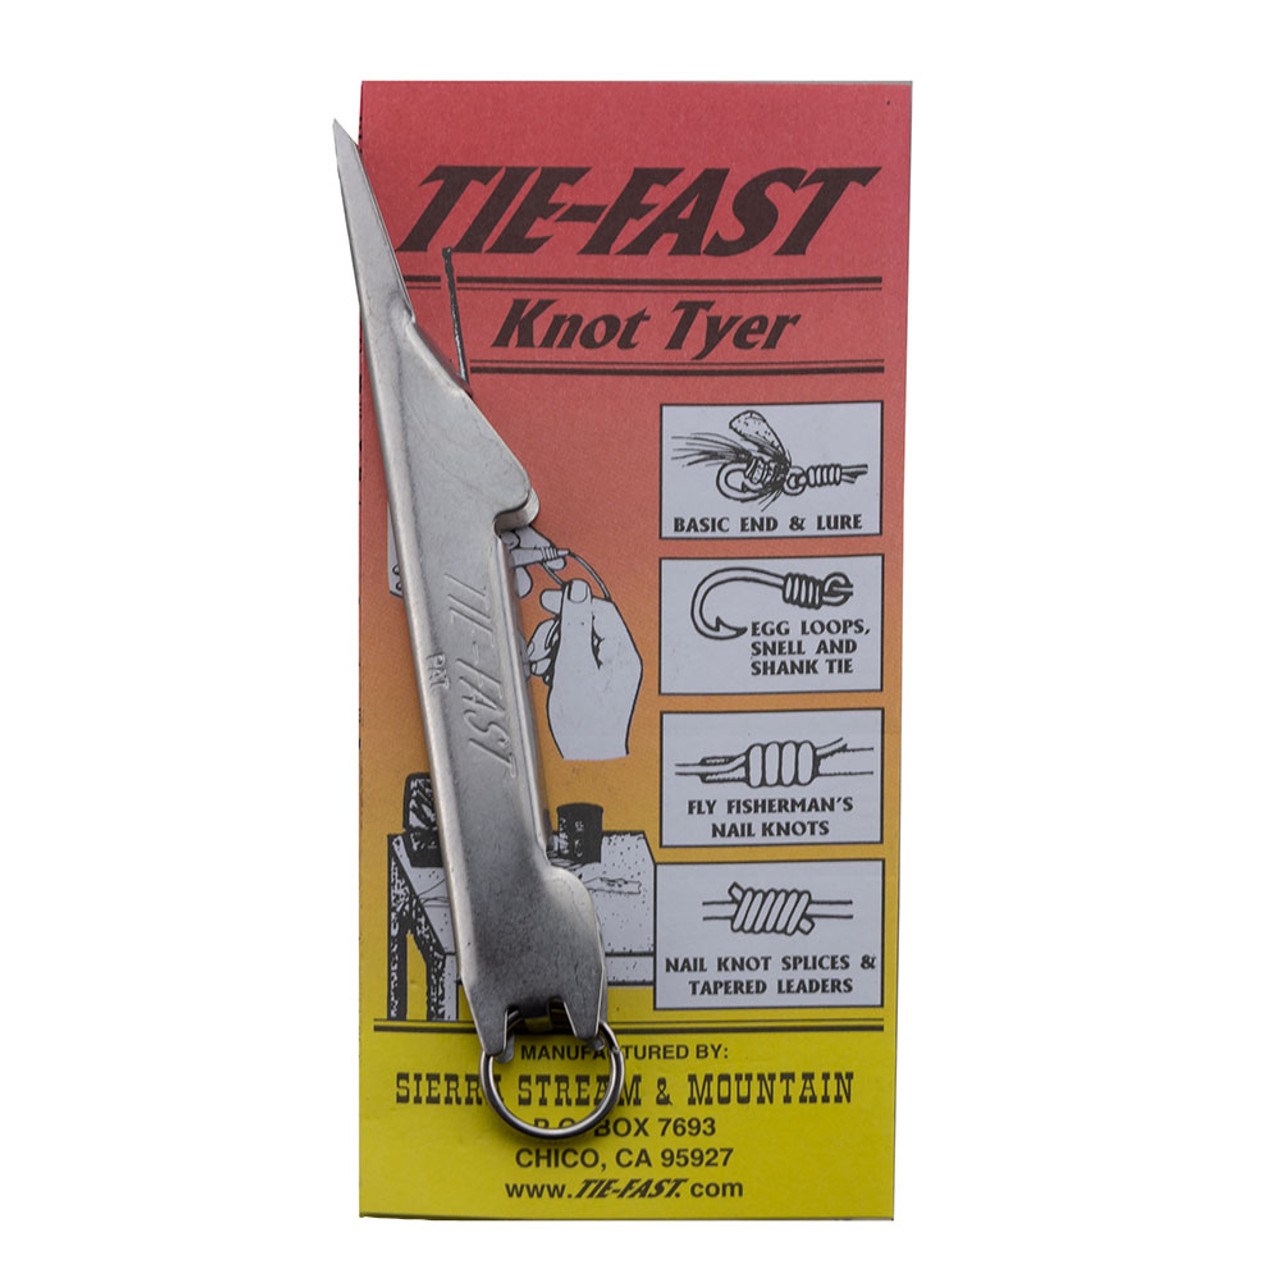 Angler's Accessories Tie Fast Knot Tyer